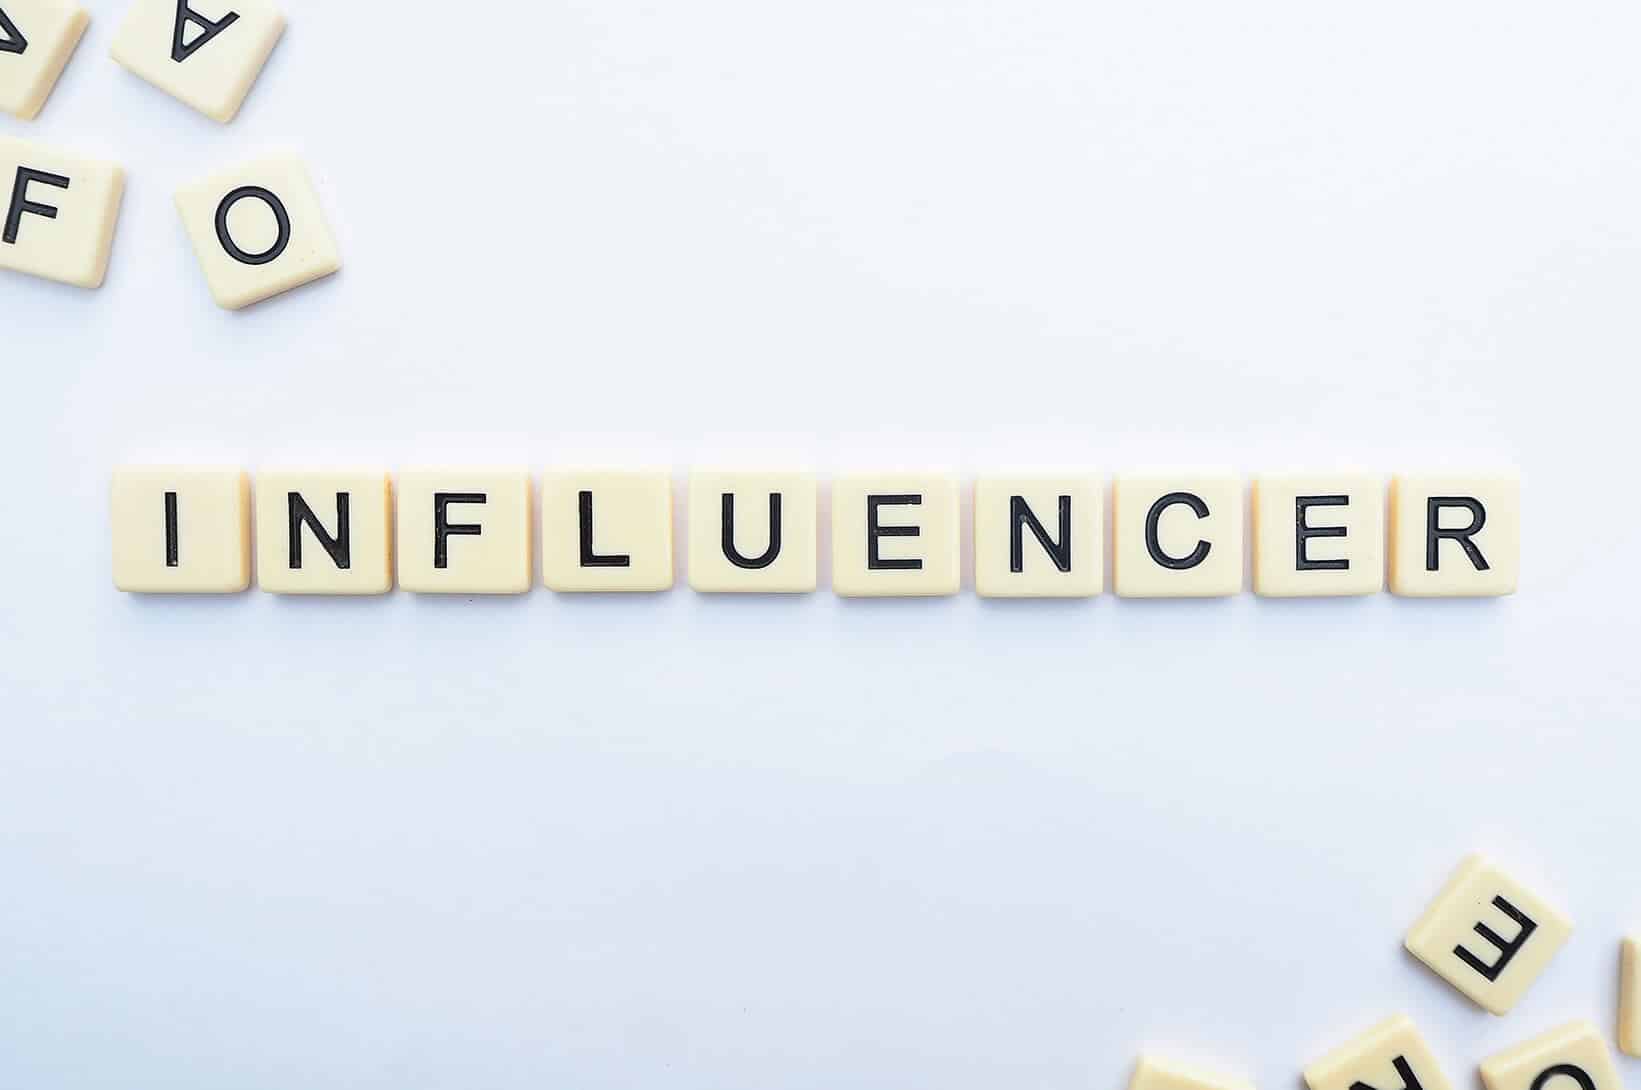 Can You Be an Influencer Without a Blog?